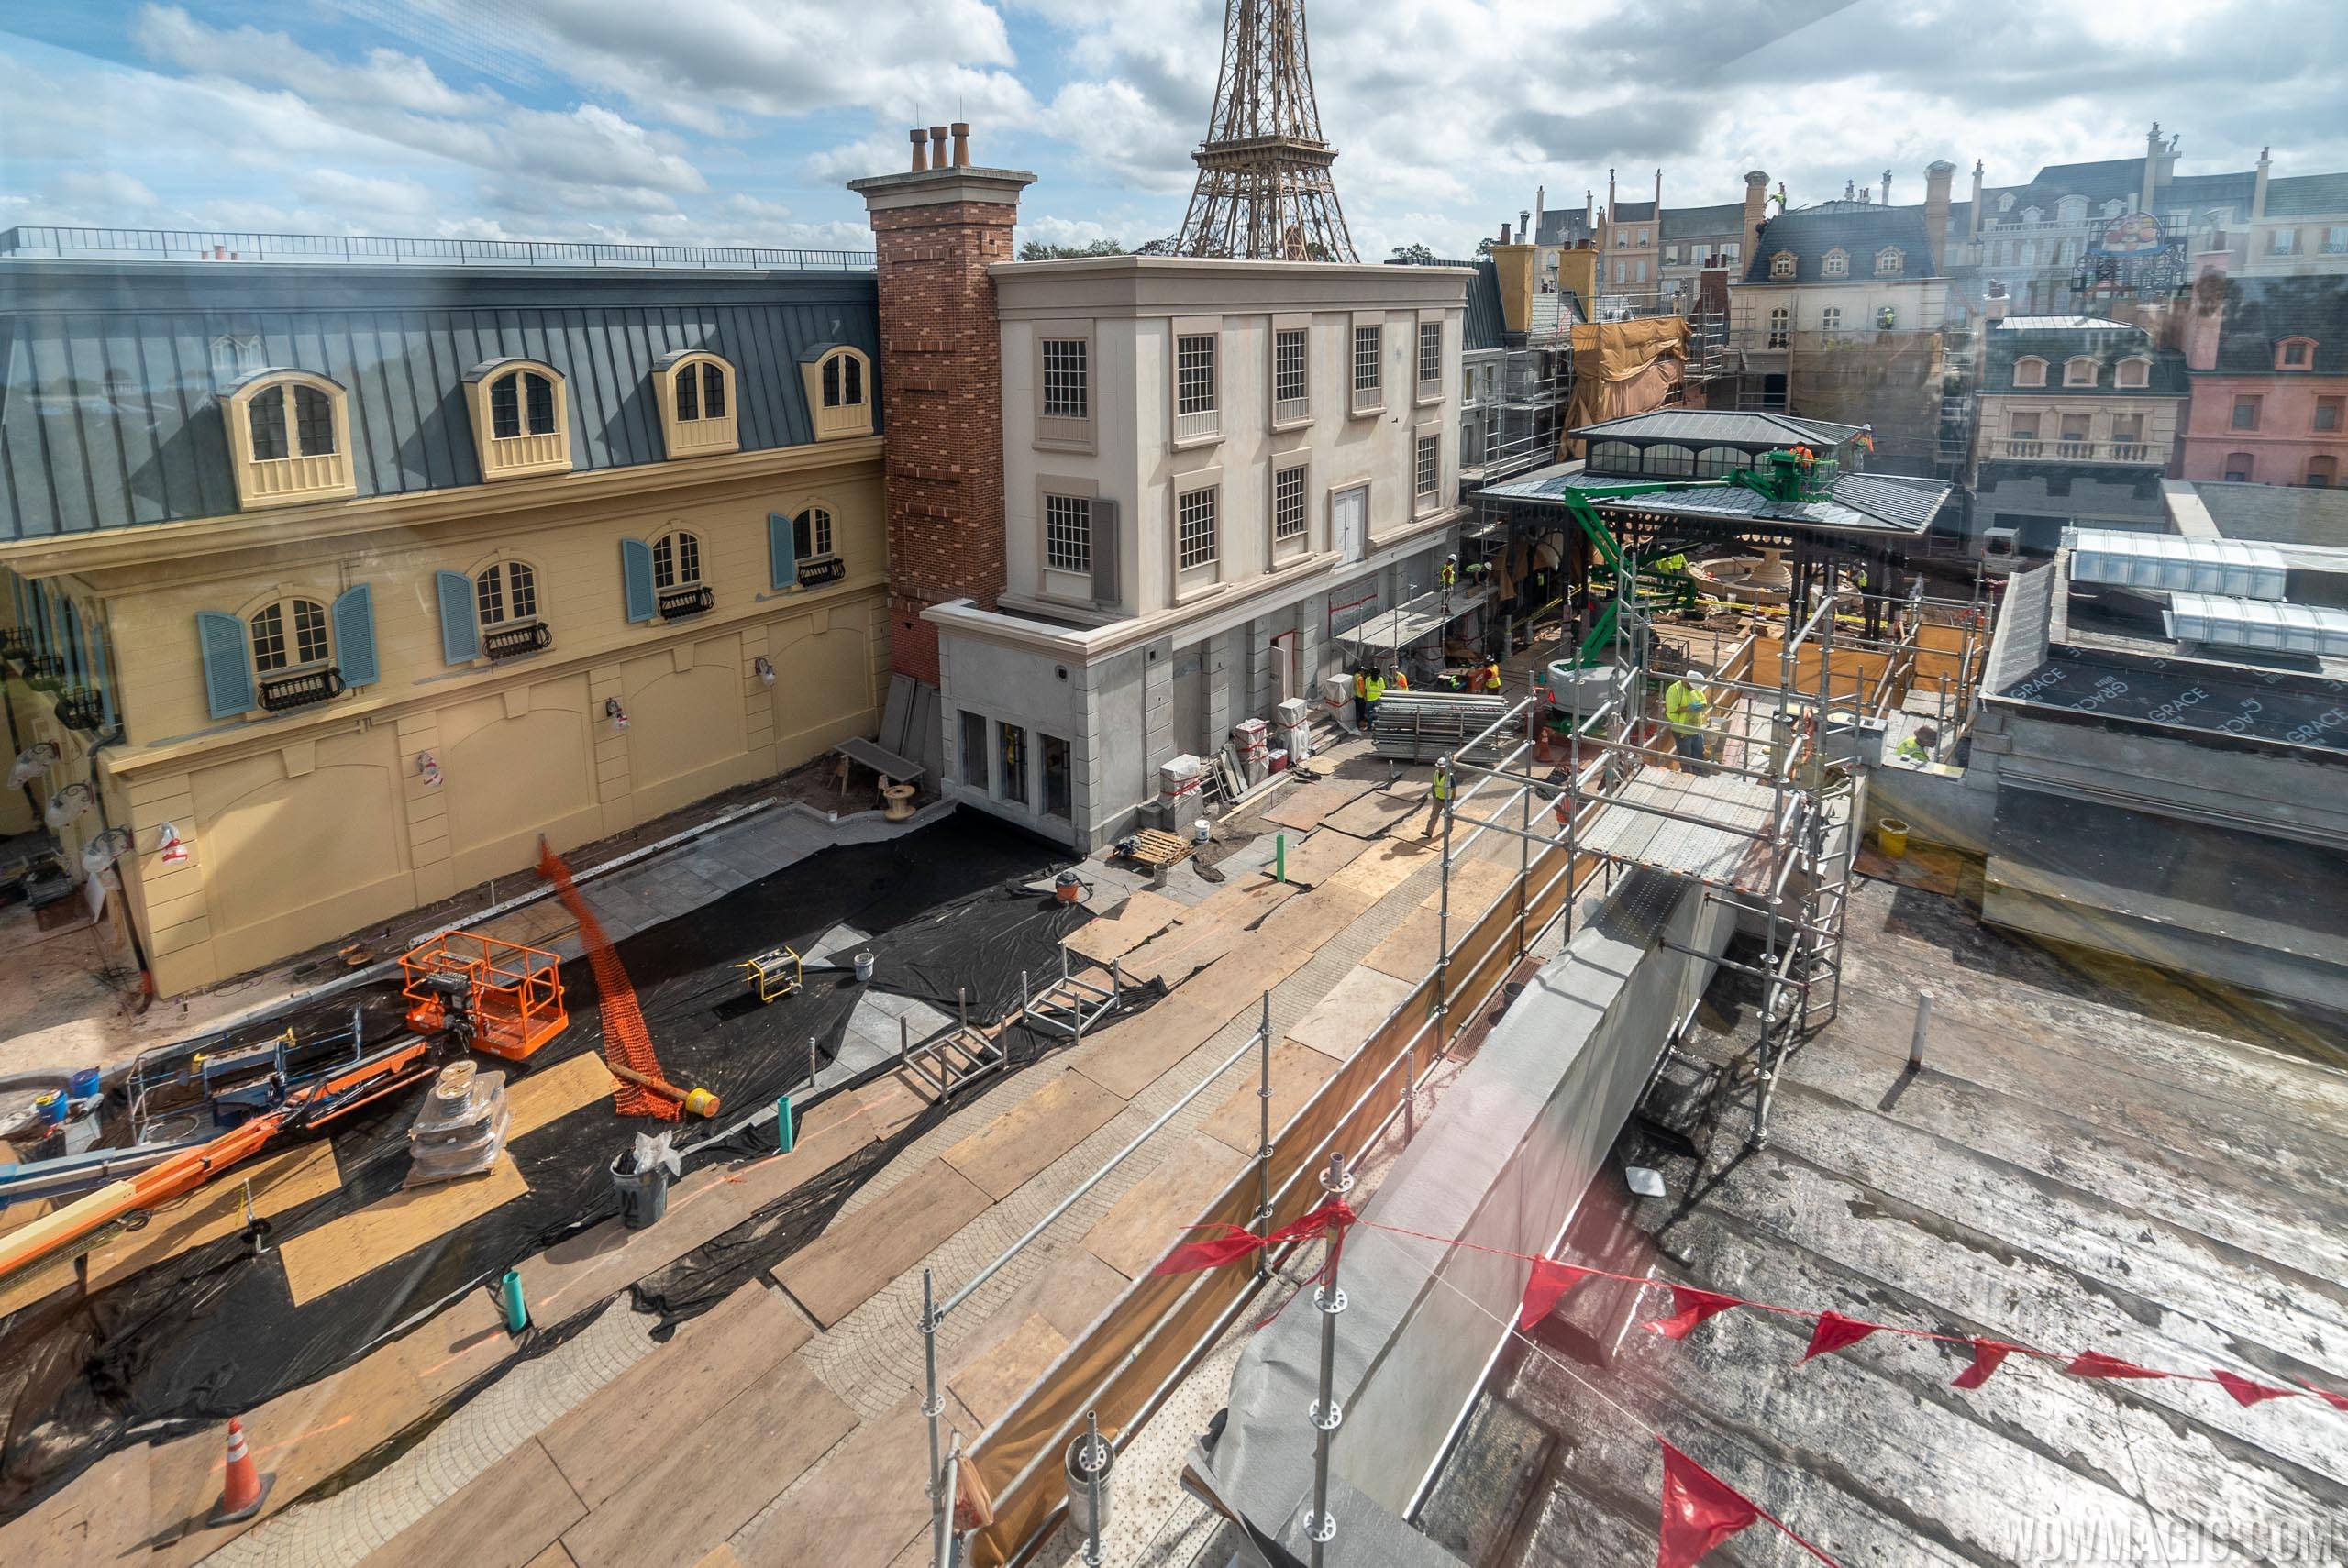 PHOTOS - A look at Remy's Ratatouille Adventure construction in Epcot